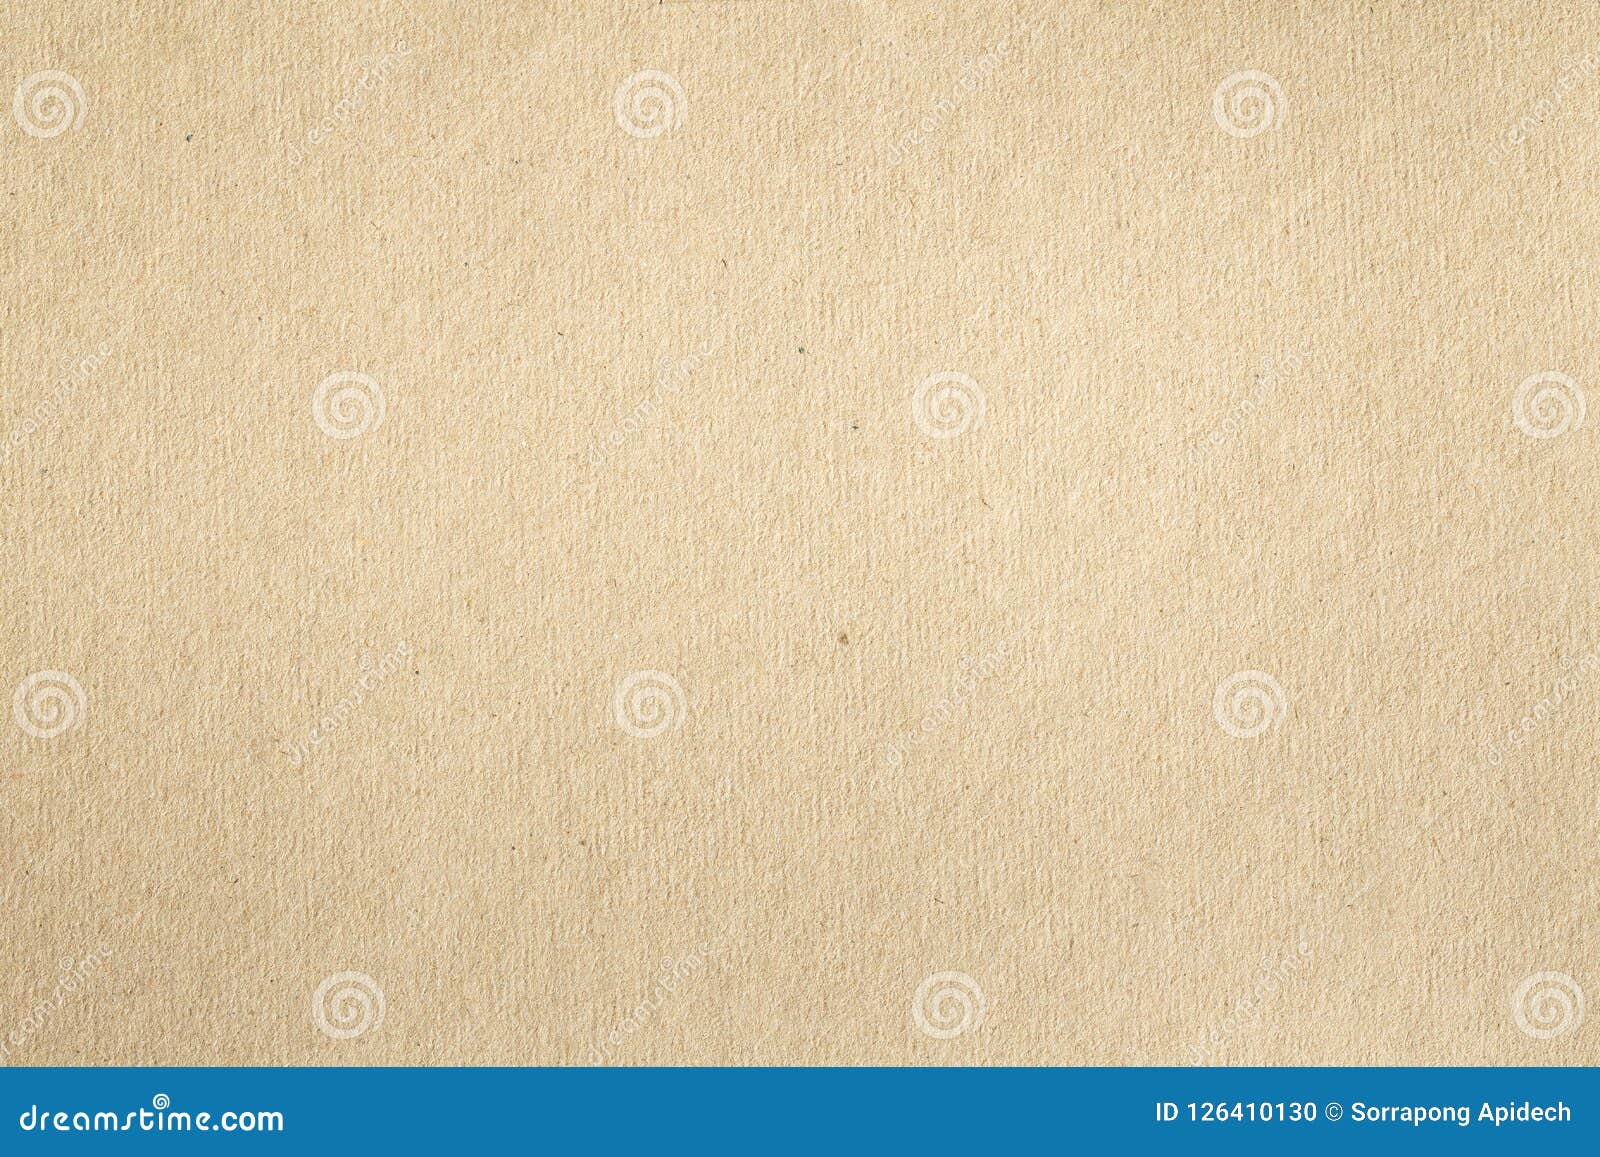 texture of old brown paper for the background,close up of recycled cardboard for 